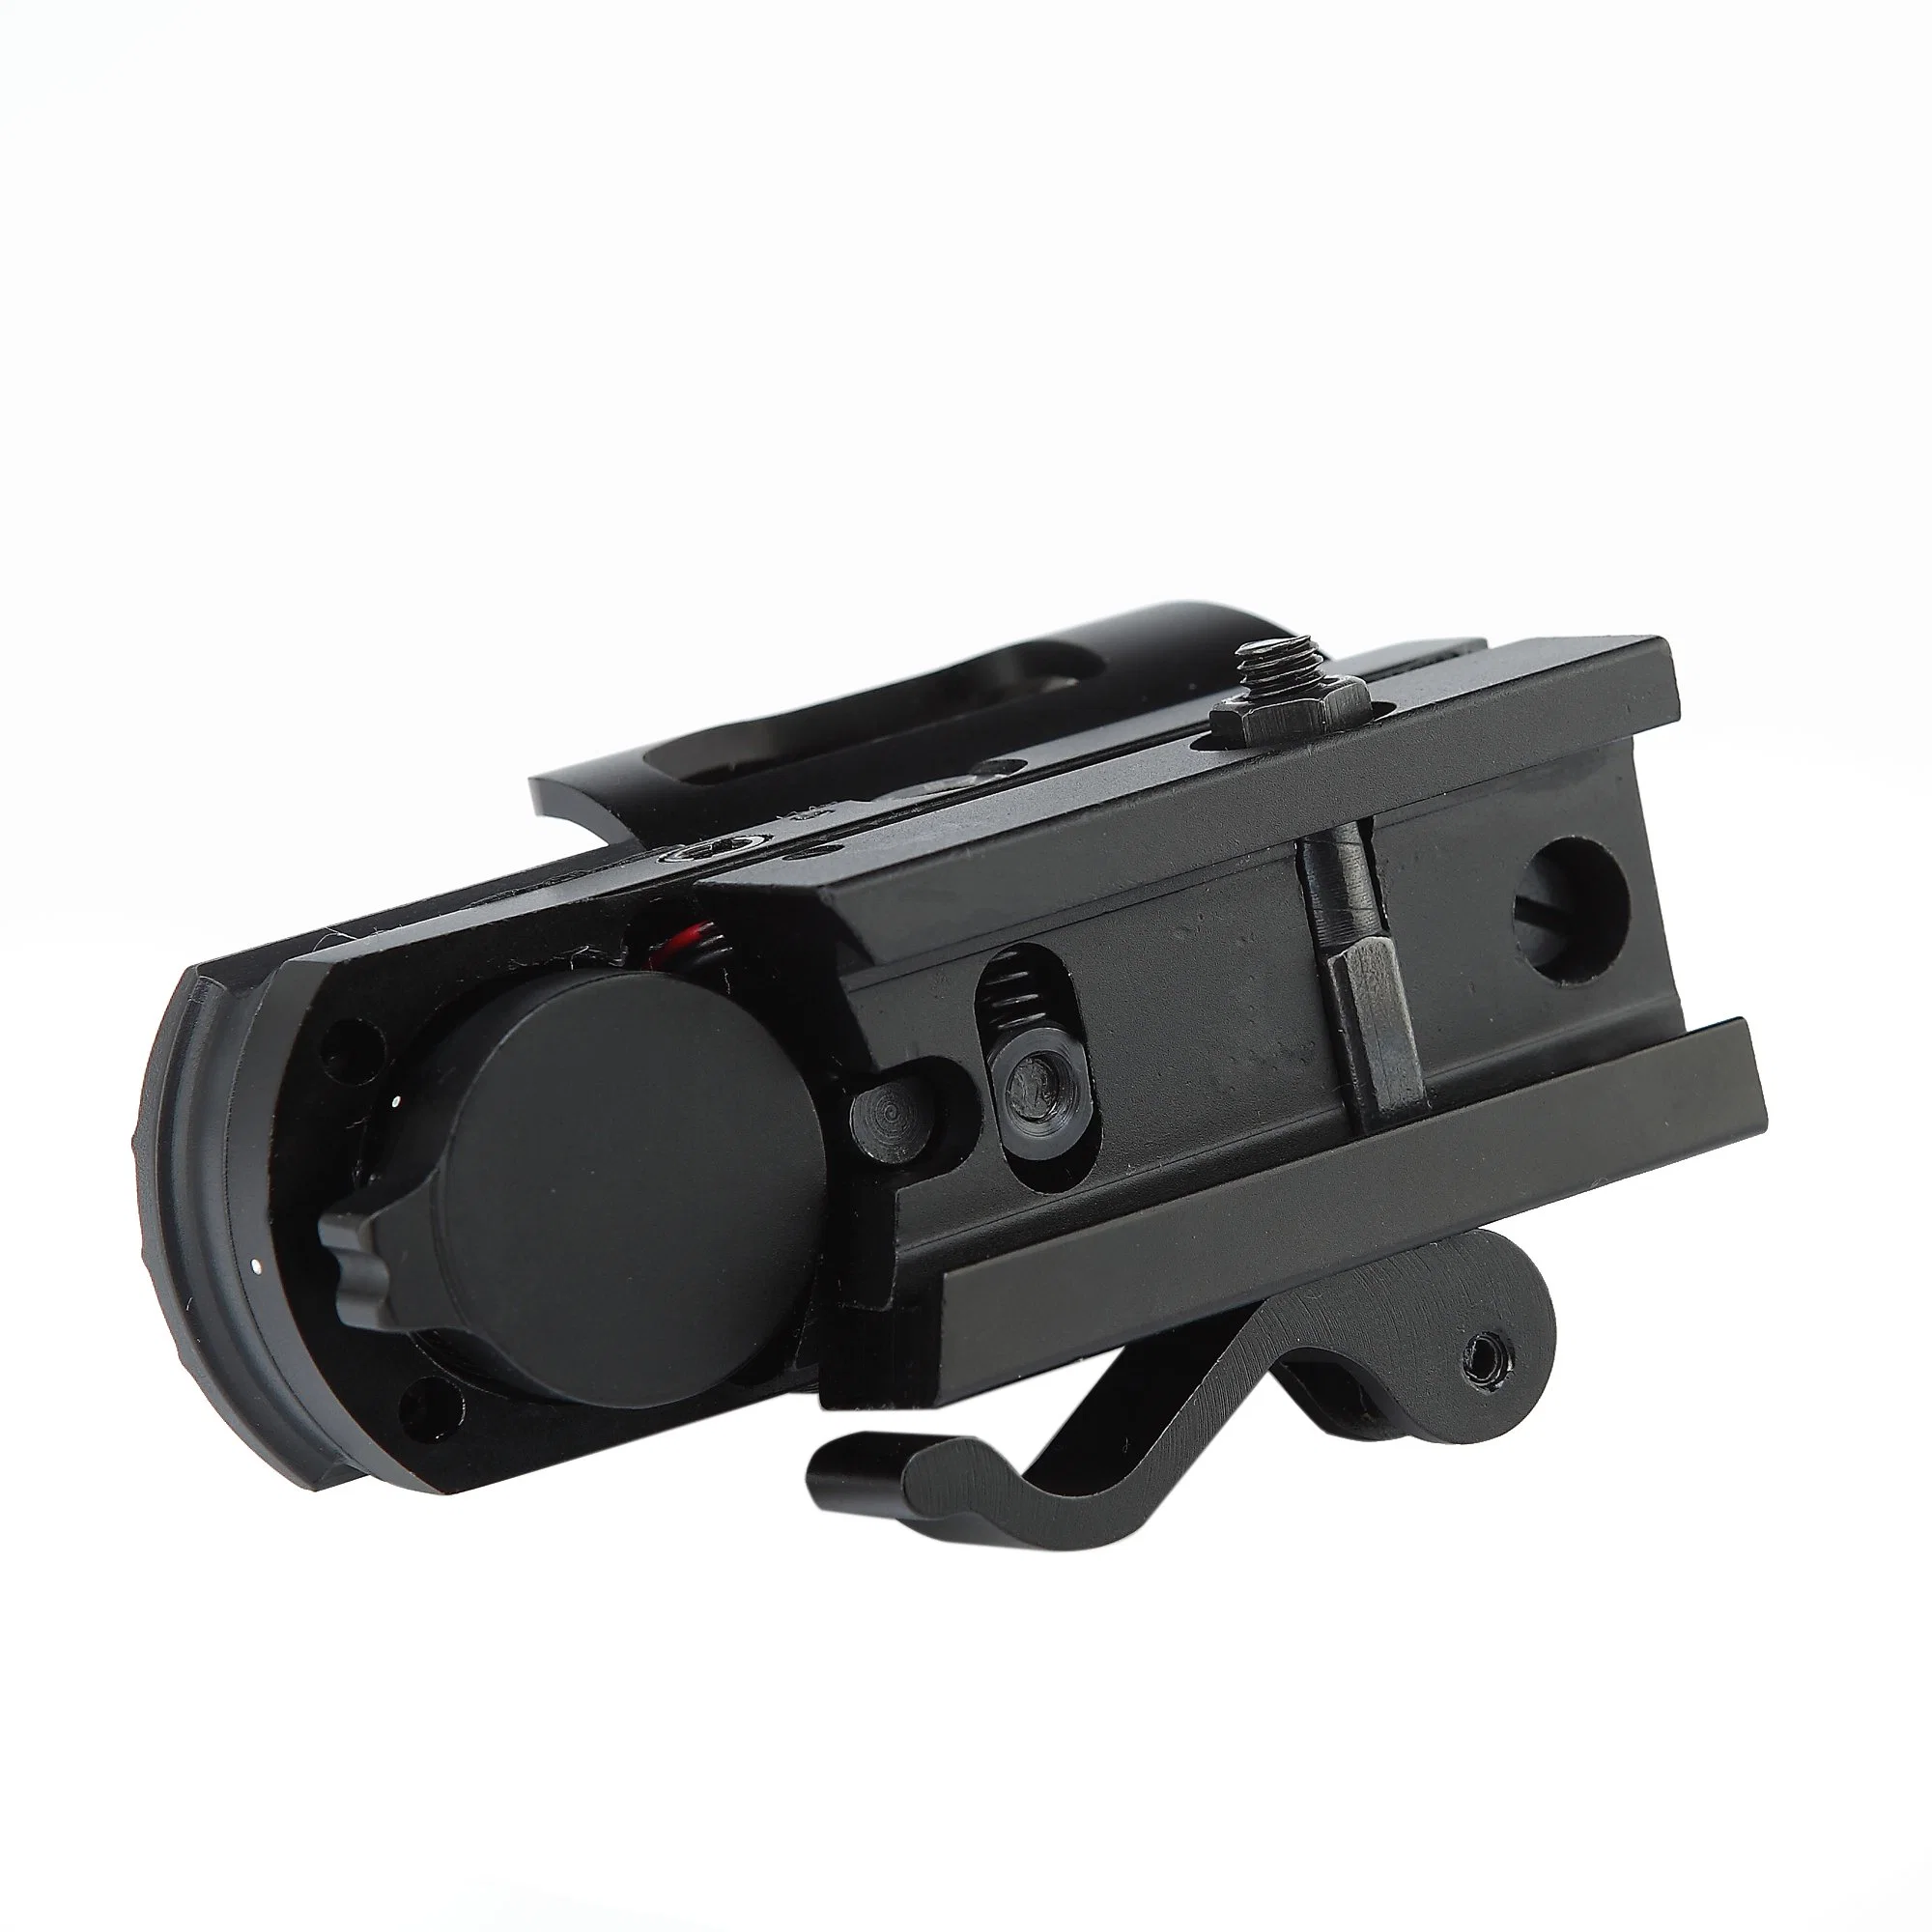 Tactical Hunting Compact Weapon Scope New 4moa with 2 Buttons Switch and Side Inserted Battery Compartment Design Holographic Red & Green DOT Reflex Sight